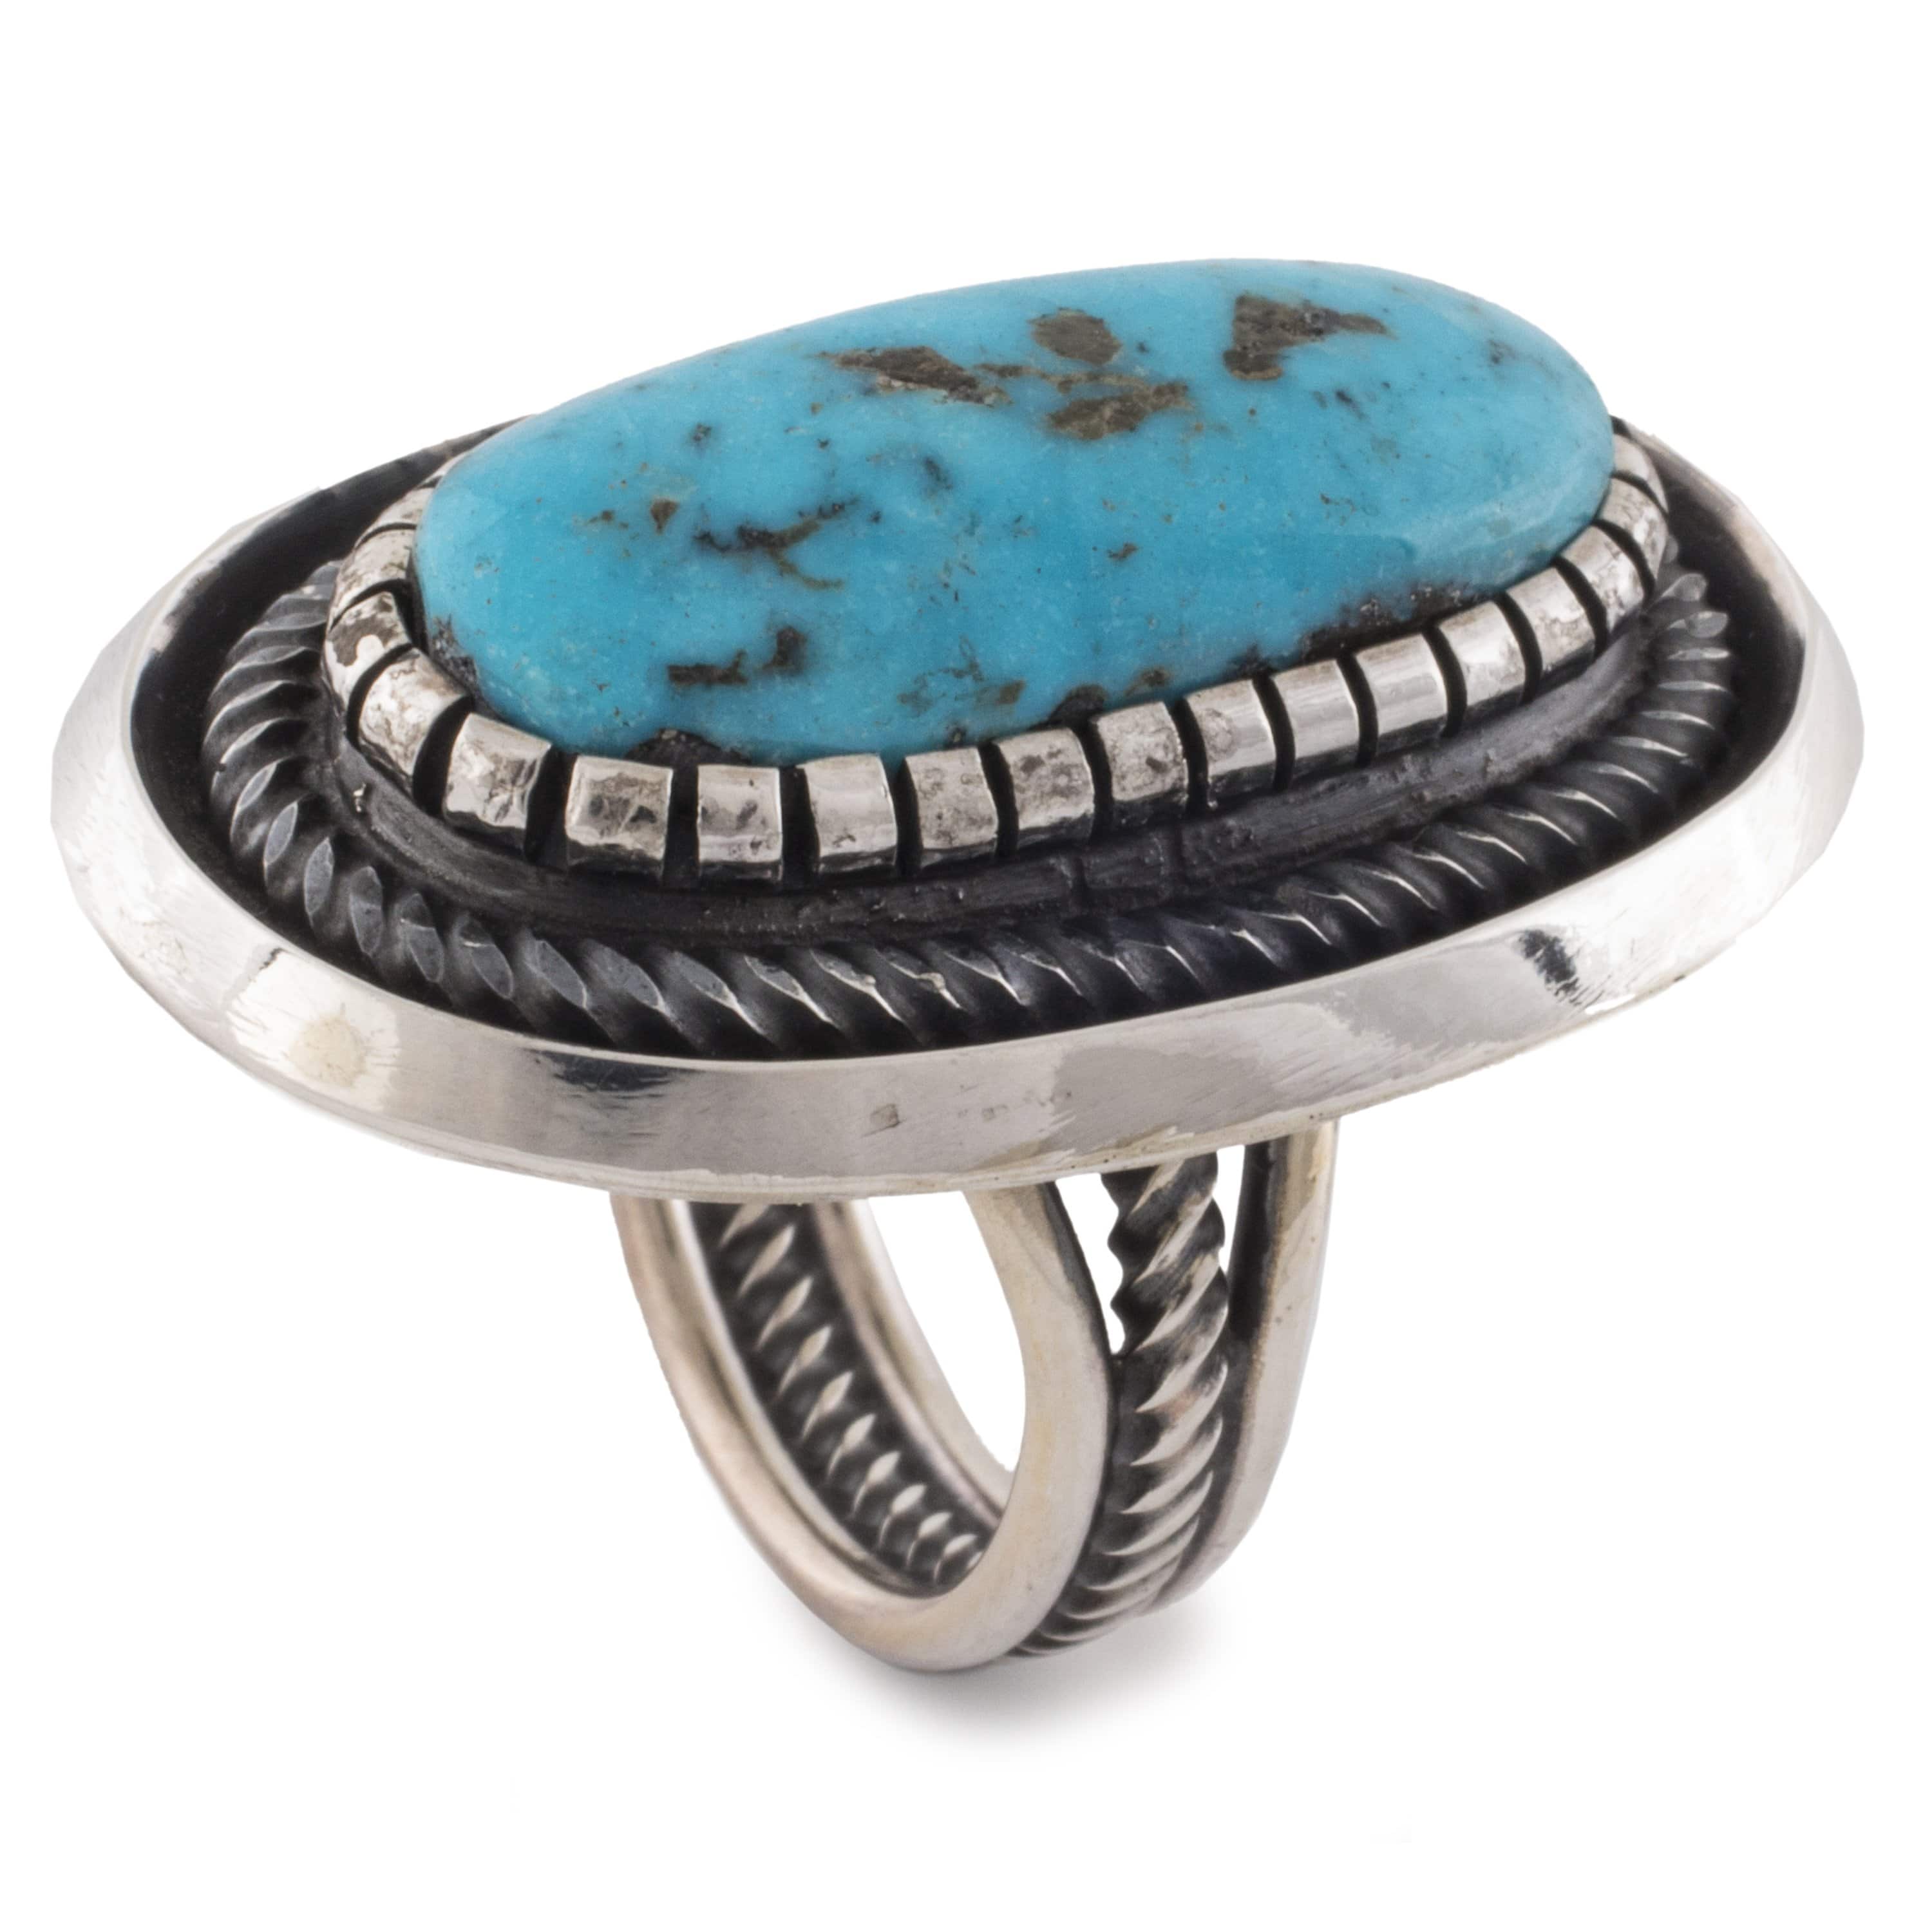 Kalifano Native American Jewelry 7 Leon Martinez Kingman Turquoise USA Native American Made 925 Sterling Silver Ring NAR900.013.7